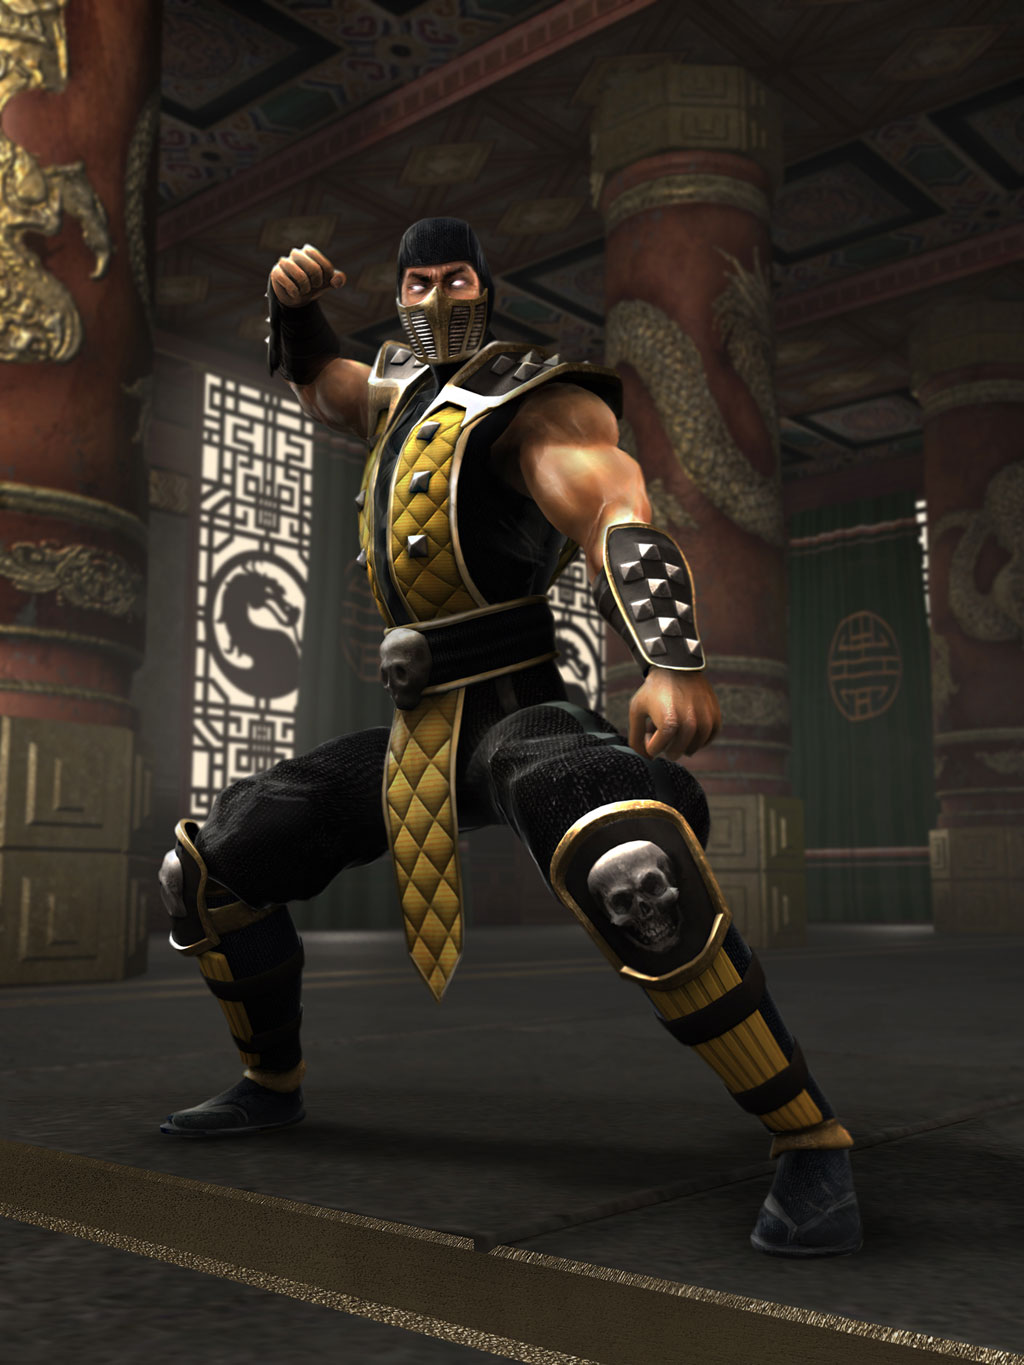 We need Shang Tsung's Shaolin Monks, MK 3 and Deadly Alliance appearances  in MK11. : r/MortalKombat